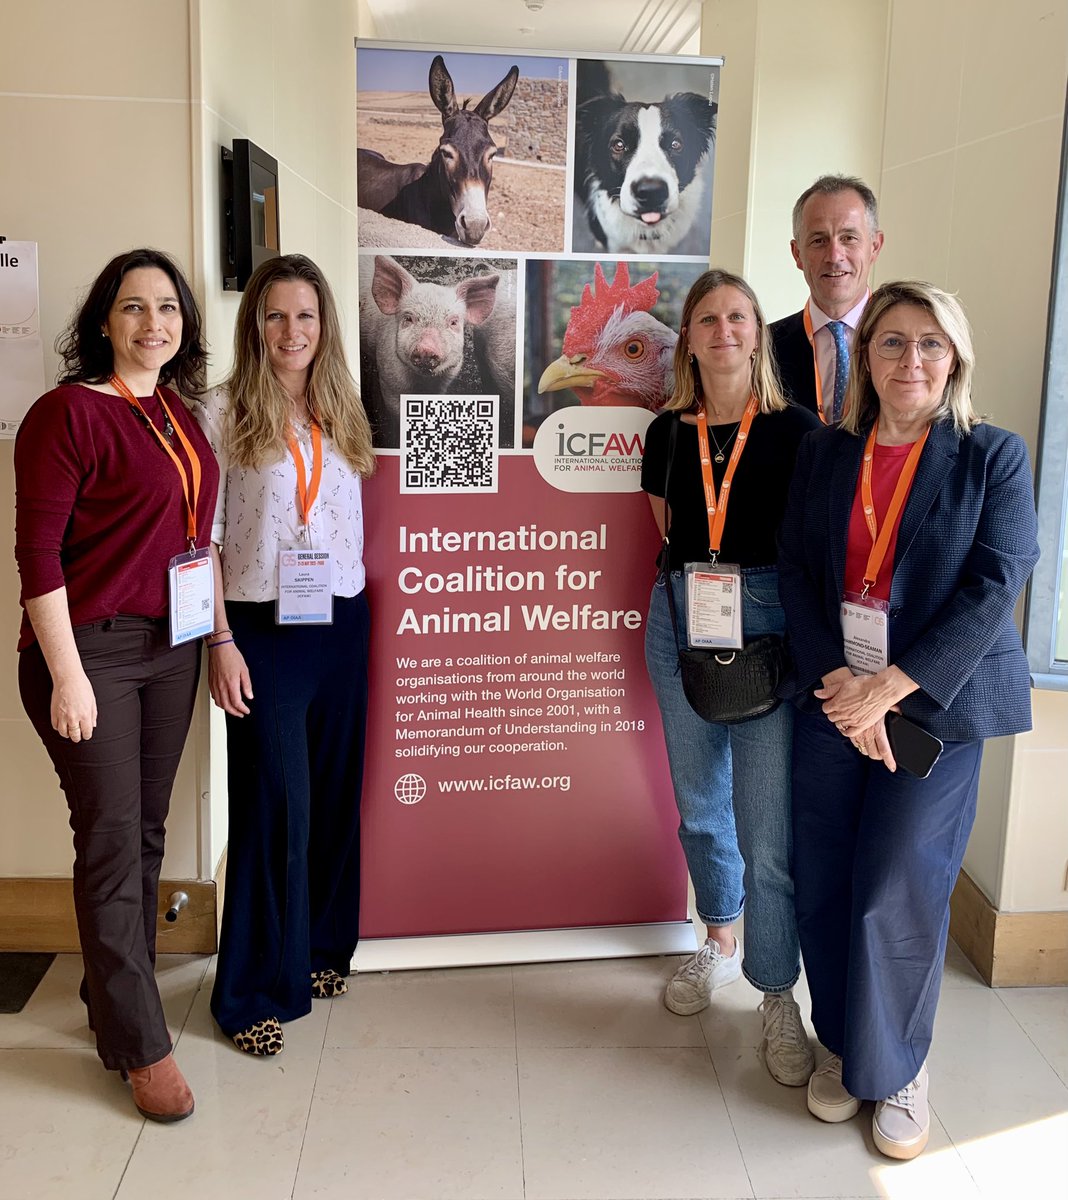 Well done to the International Coalition for Animal Welfare Steering Group for their hard work up to and around the #ICFAW side event at 90th #WOAHGS (members tagged plus Dr Carolina Maciel)